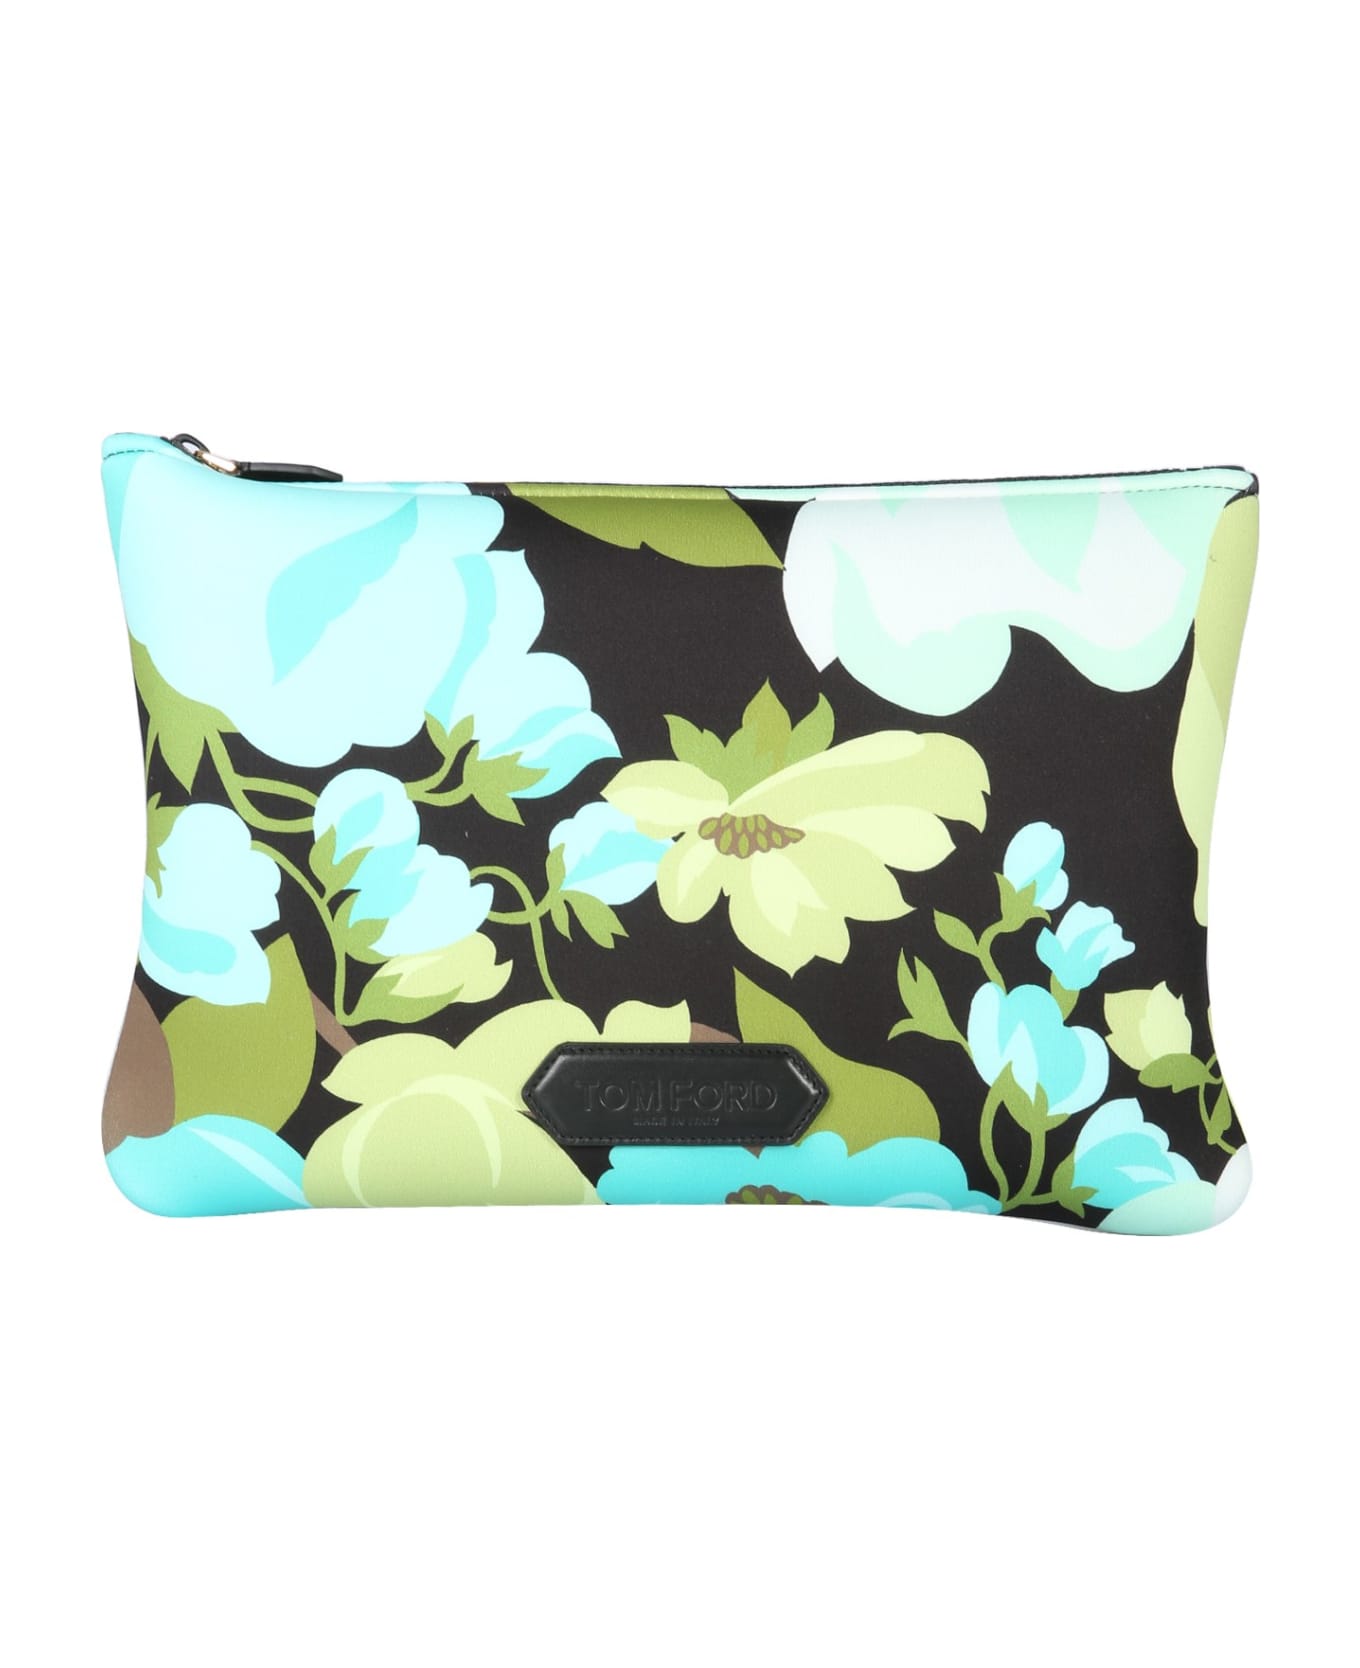 Tom Ford Floral Print Pouch - MULTICOLOR